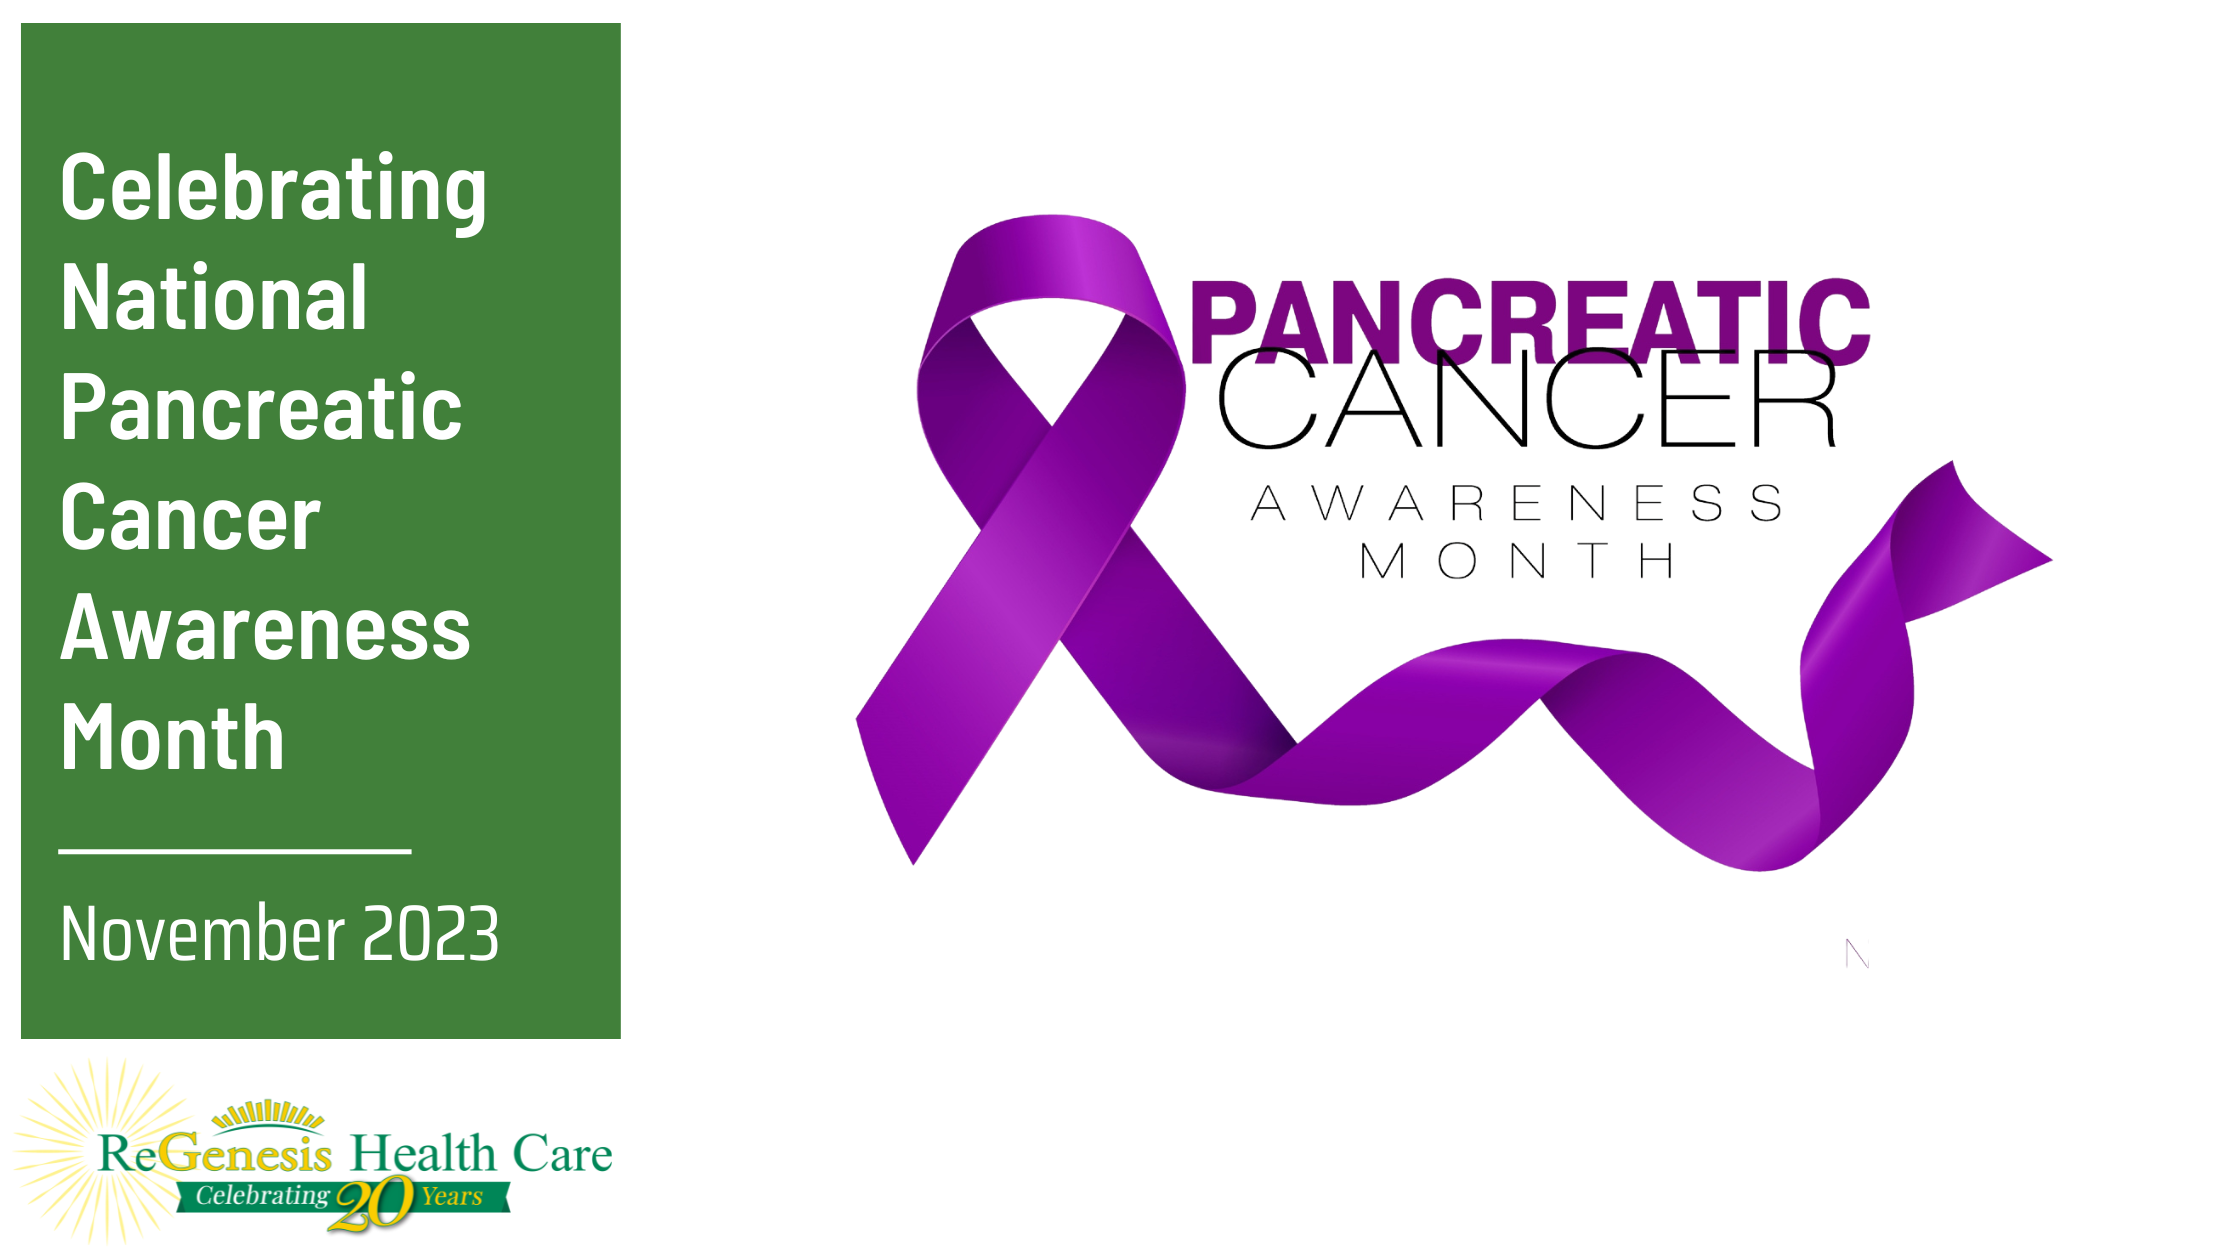 Pancreatic Cancer Action - Back pain is experienced by many people